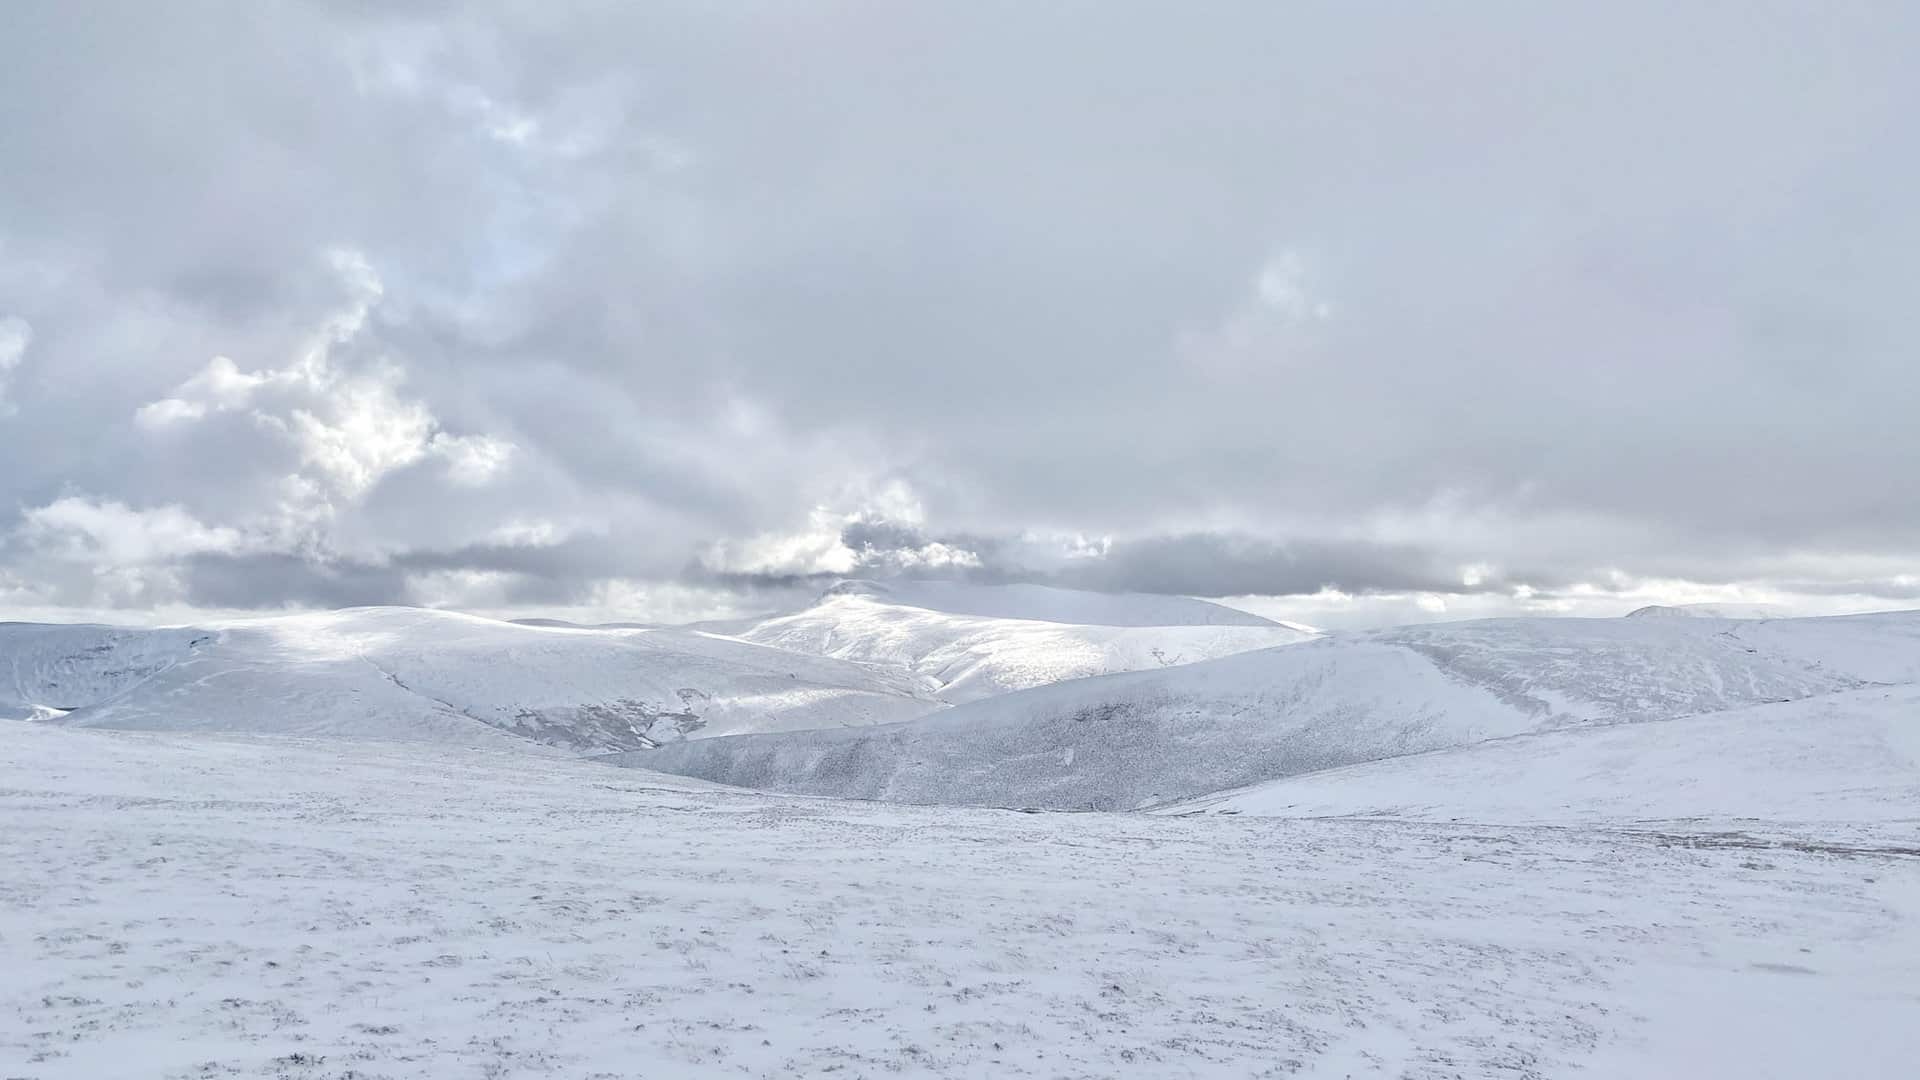 The view south from Hare Stones towards the mountain ranges of Blencathra and Skiddaw.